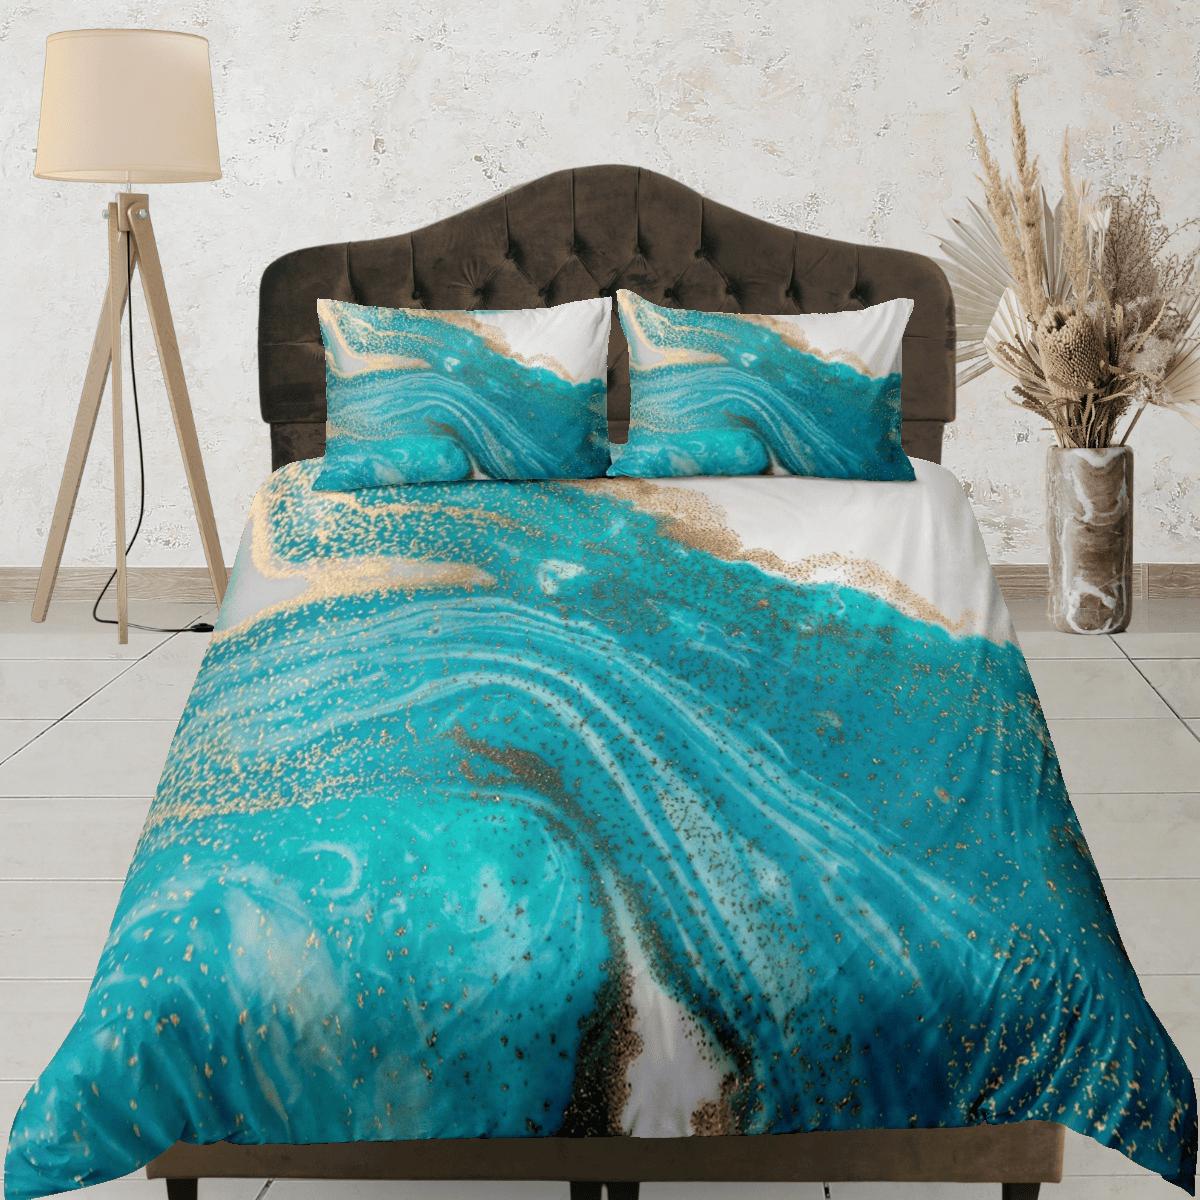 daintyduvet Contemporary bedroom set turquoise aesthetic duvet cover, luxury gold marble abstract art room decor boho chic bedding set full king queen